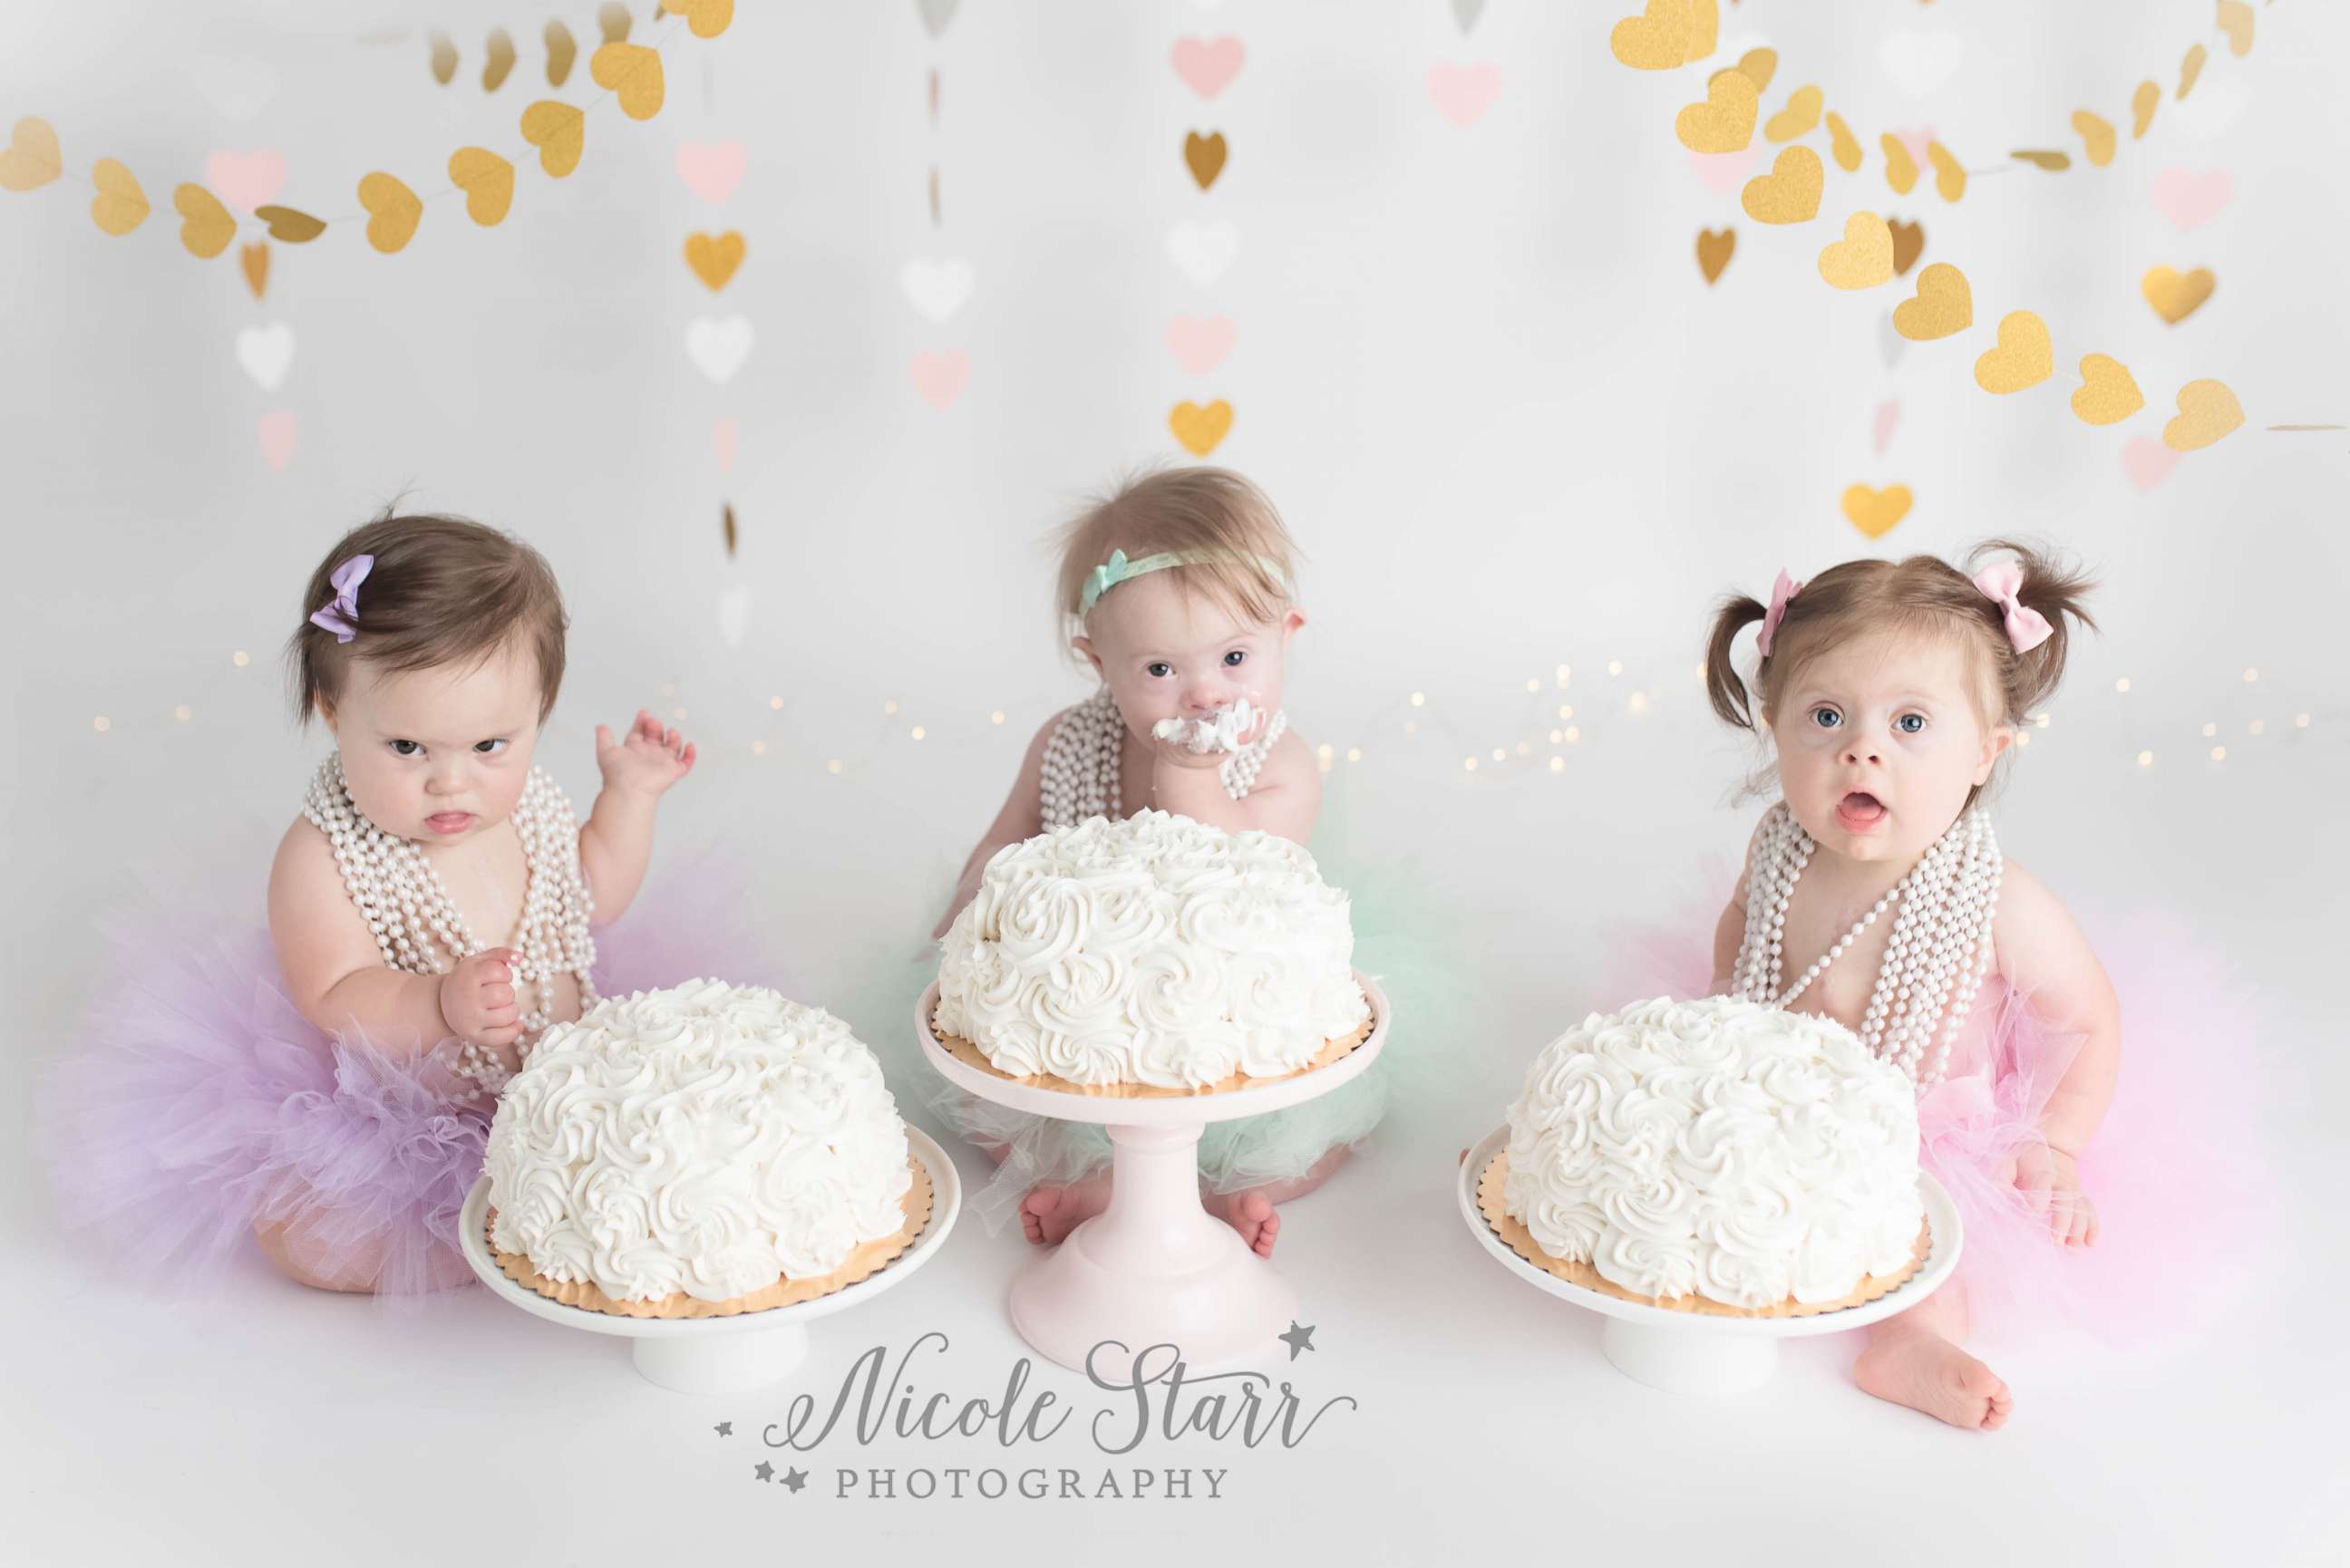 PHOTO: Babies' Three of Hearts photo shoot celebrates Down syndrome and life after heart surgery.